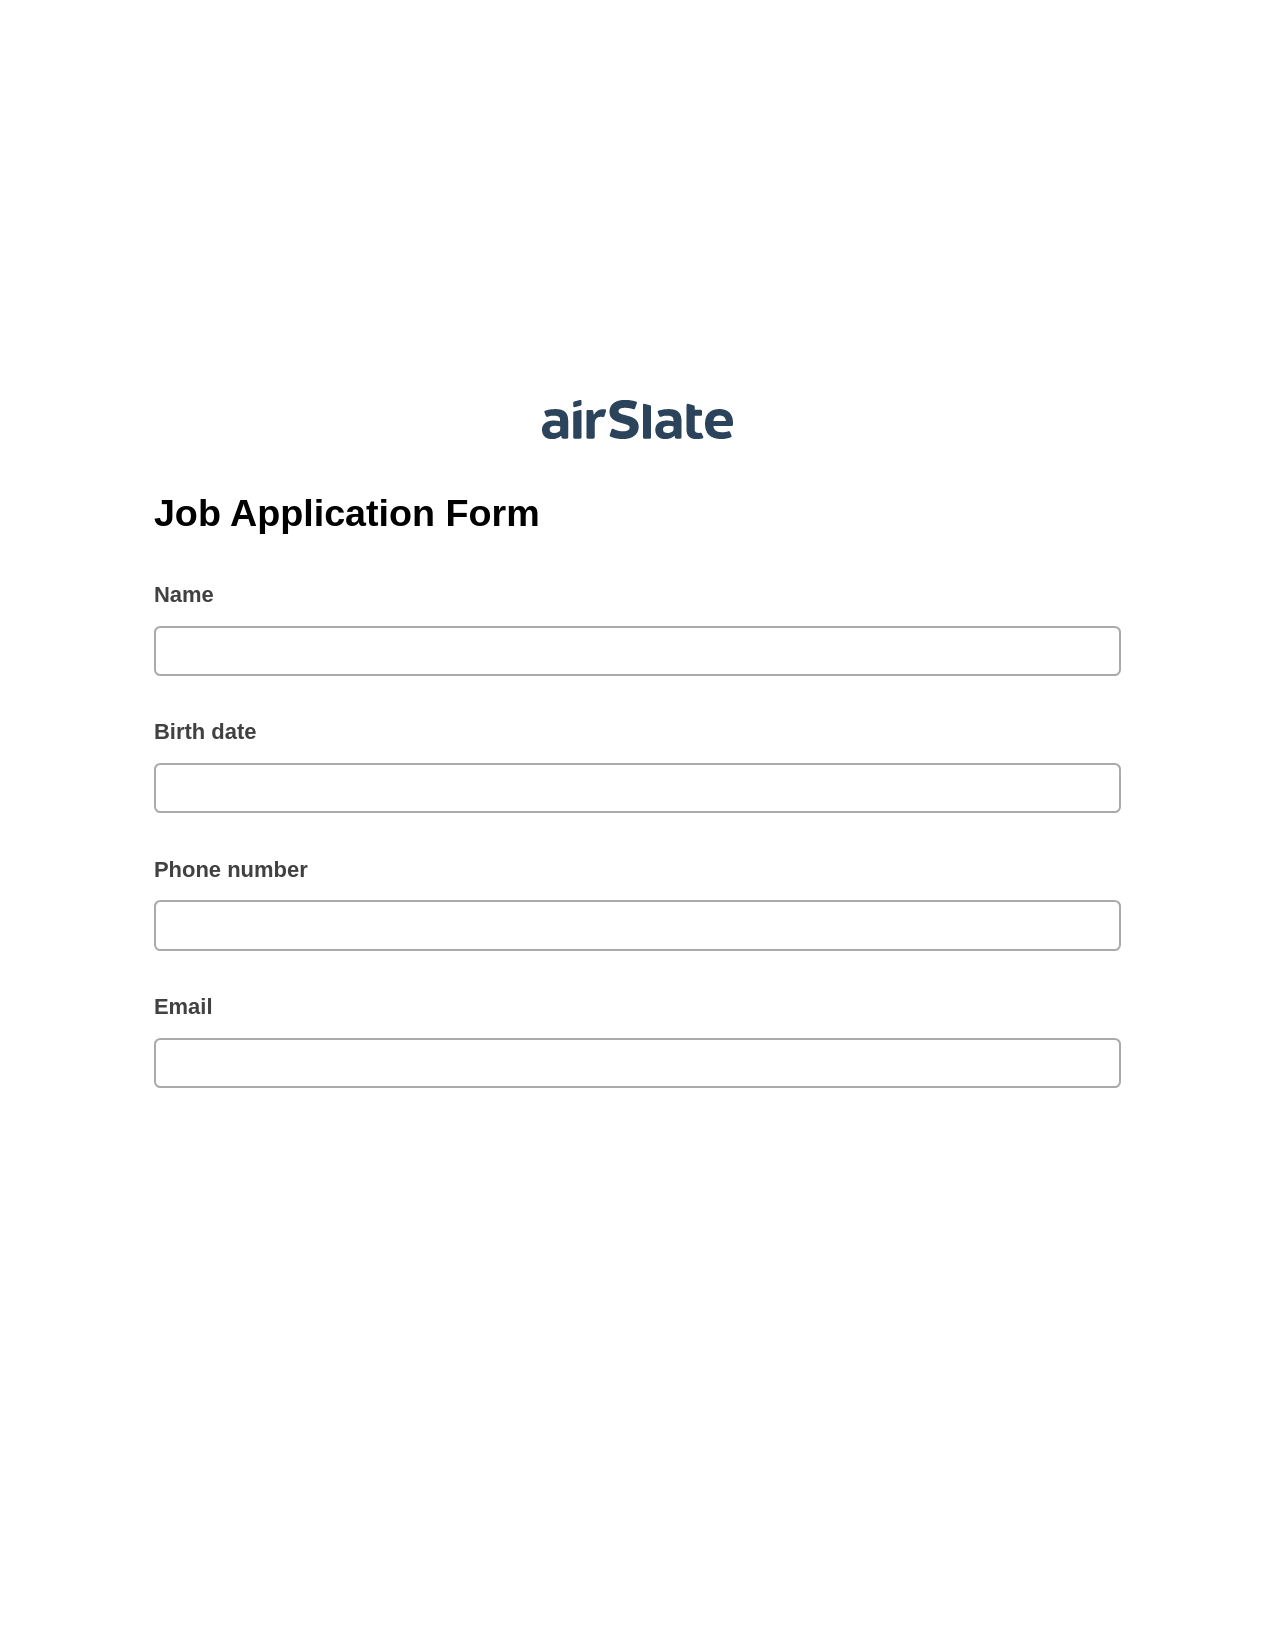 Job Application Form Pre-fill from Excel Spreadsheet Dropdown Options Bot, Create slate bot, Export to Smartsheet